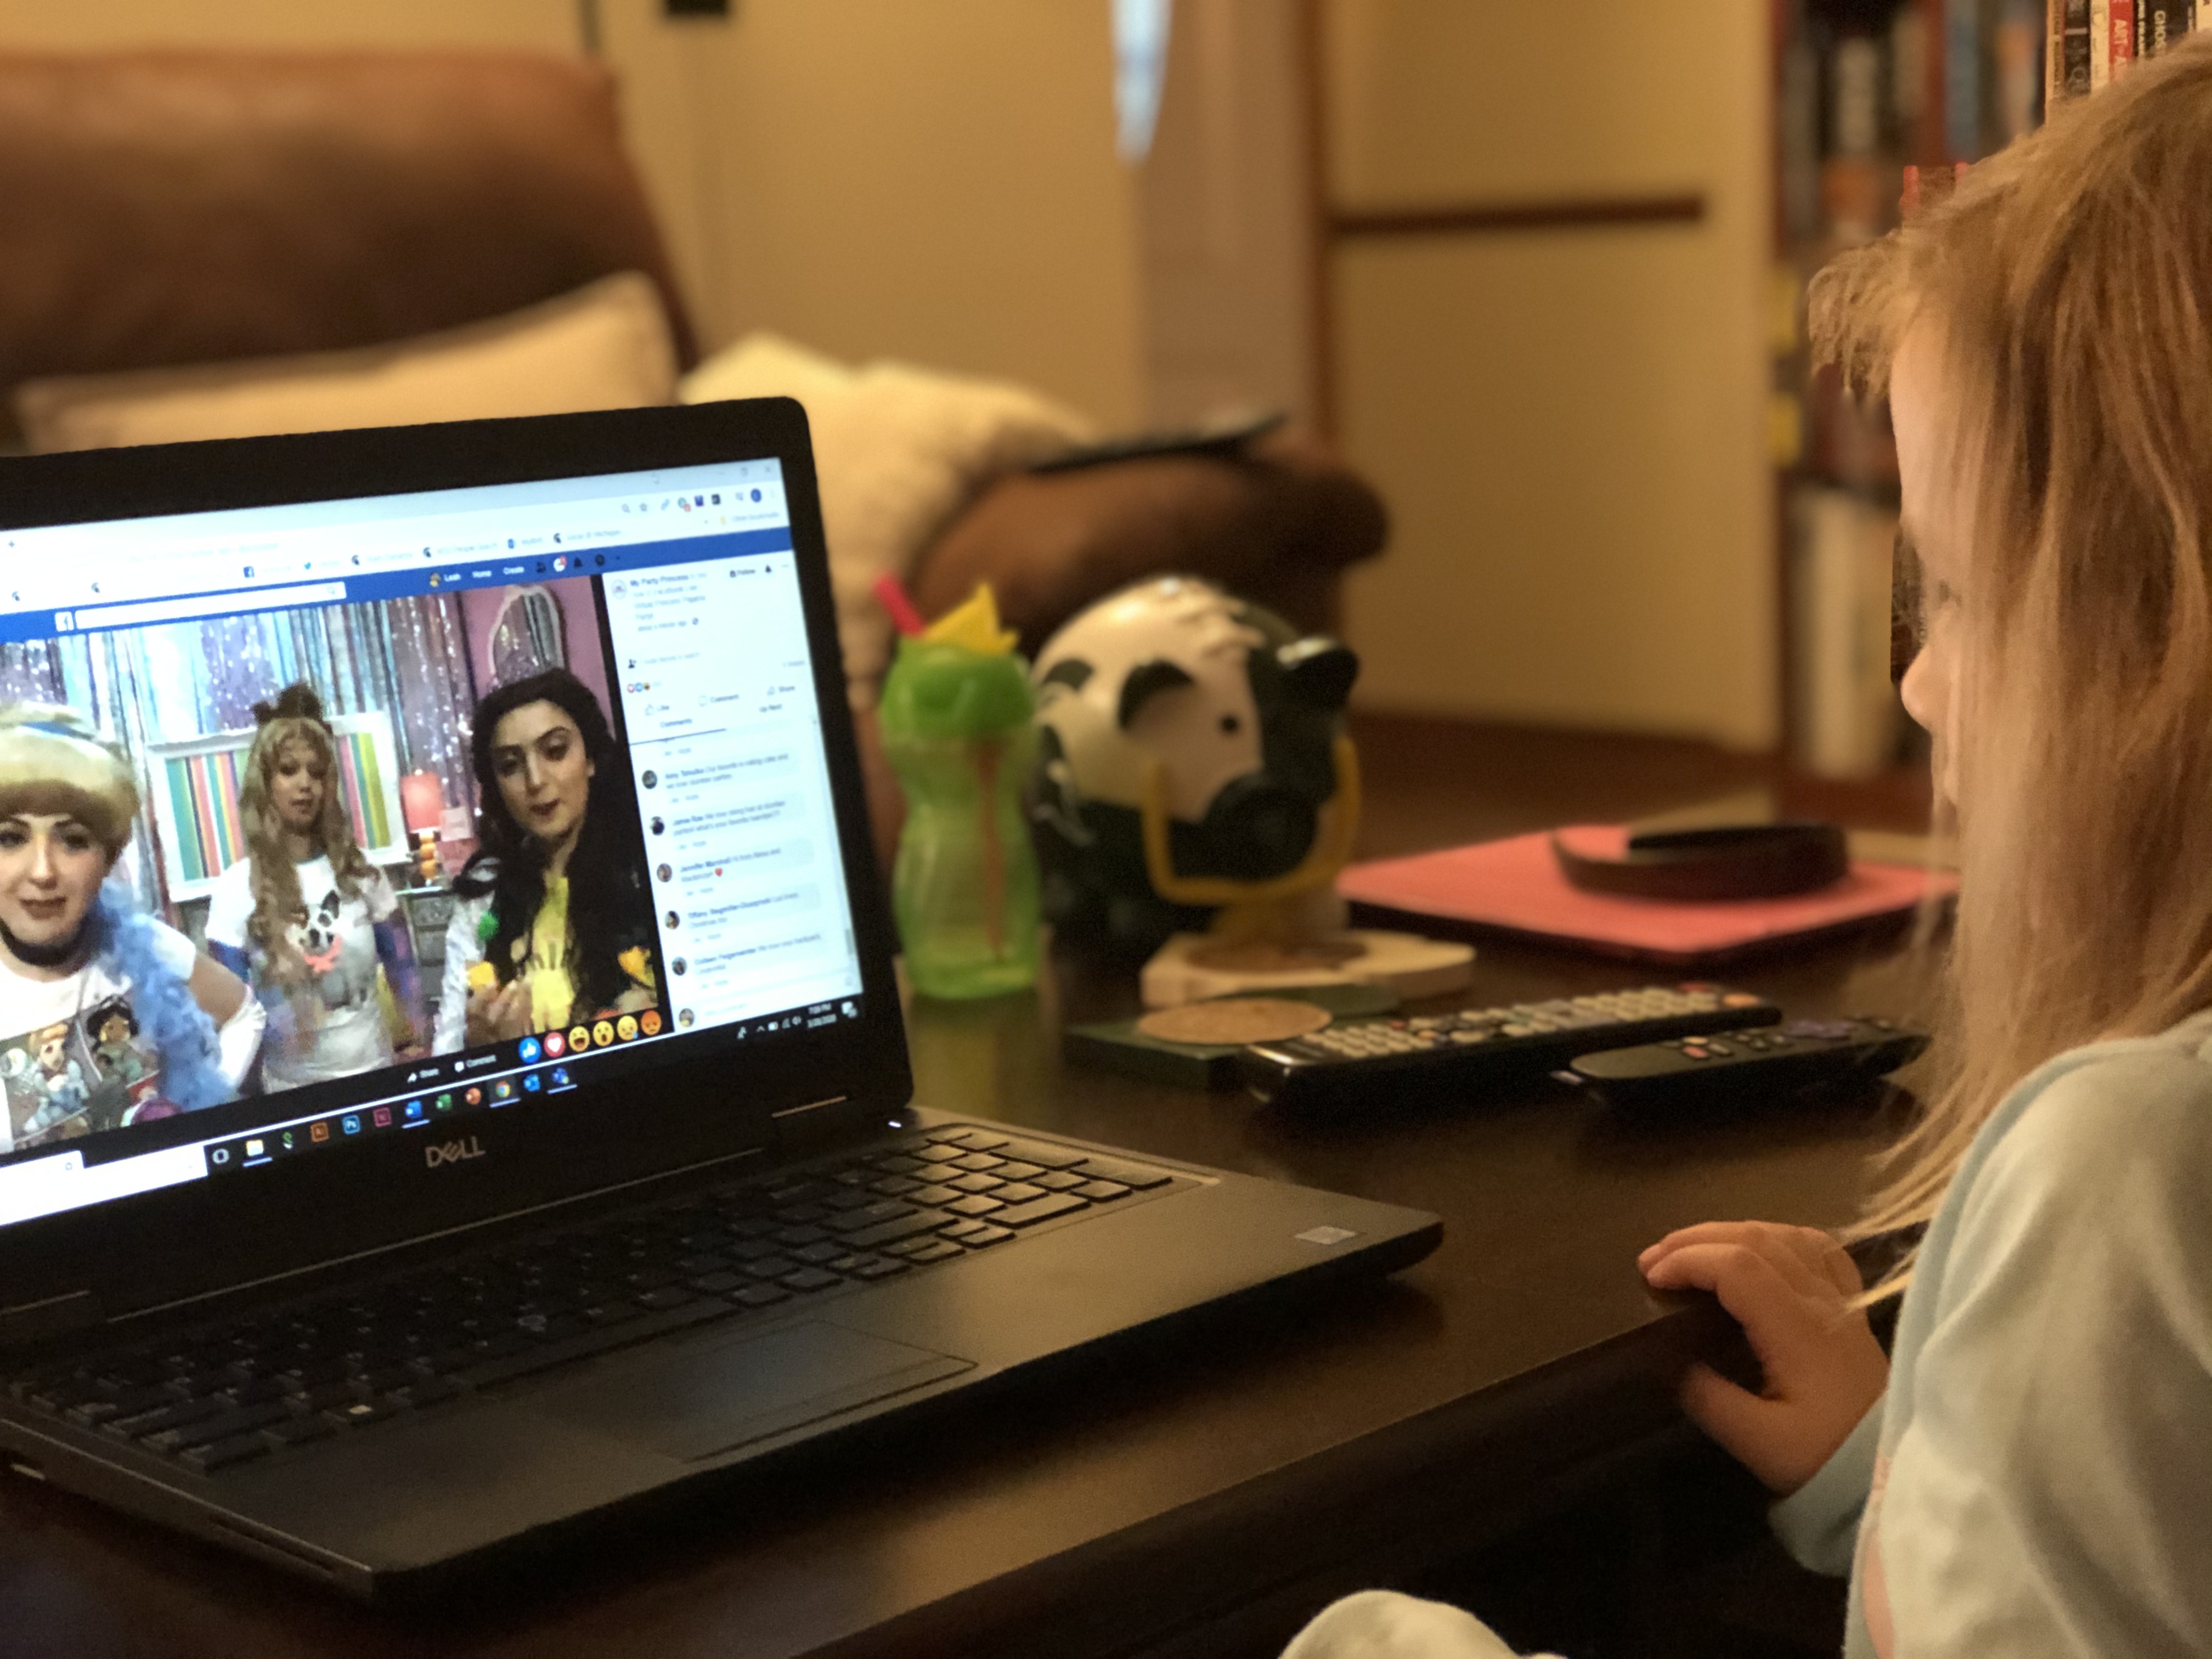 MSU StratCom student Leah Ball's daughter watching a show on a laptop